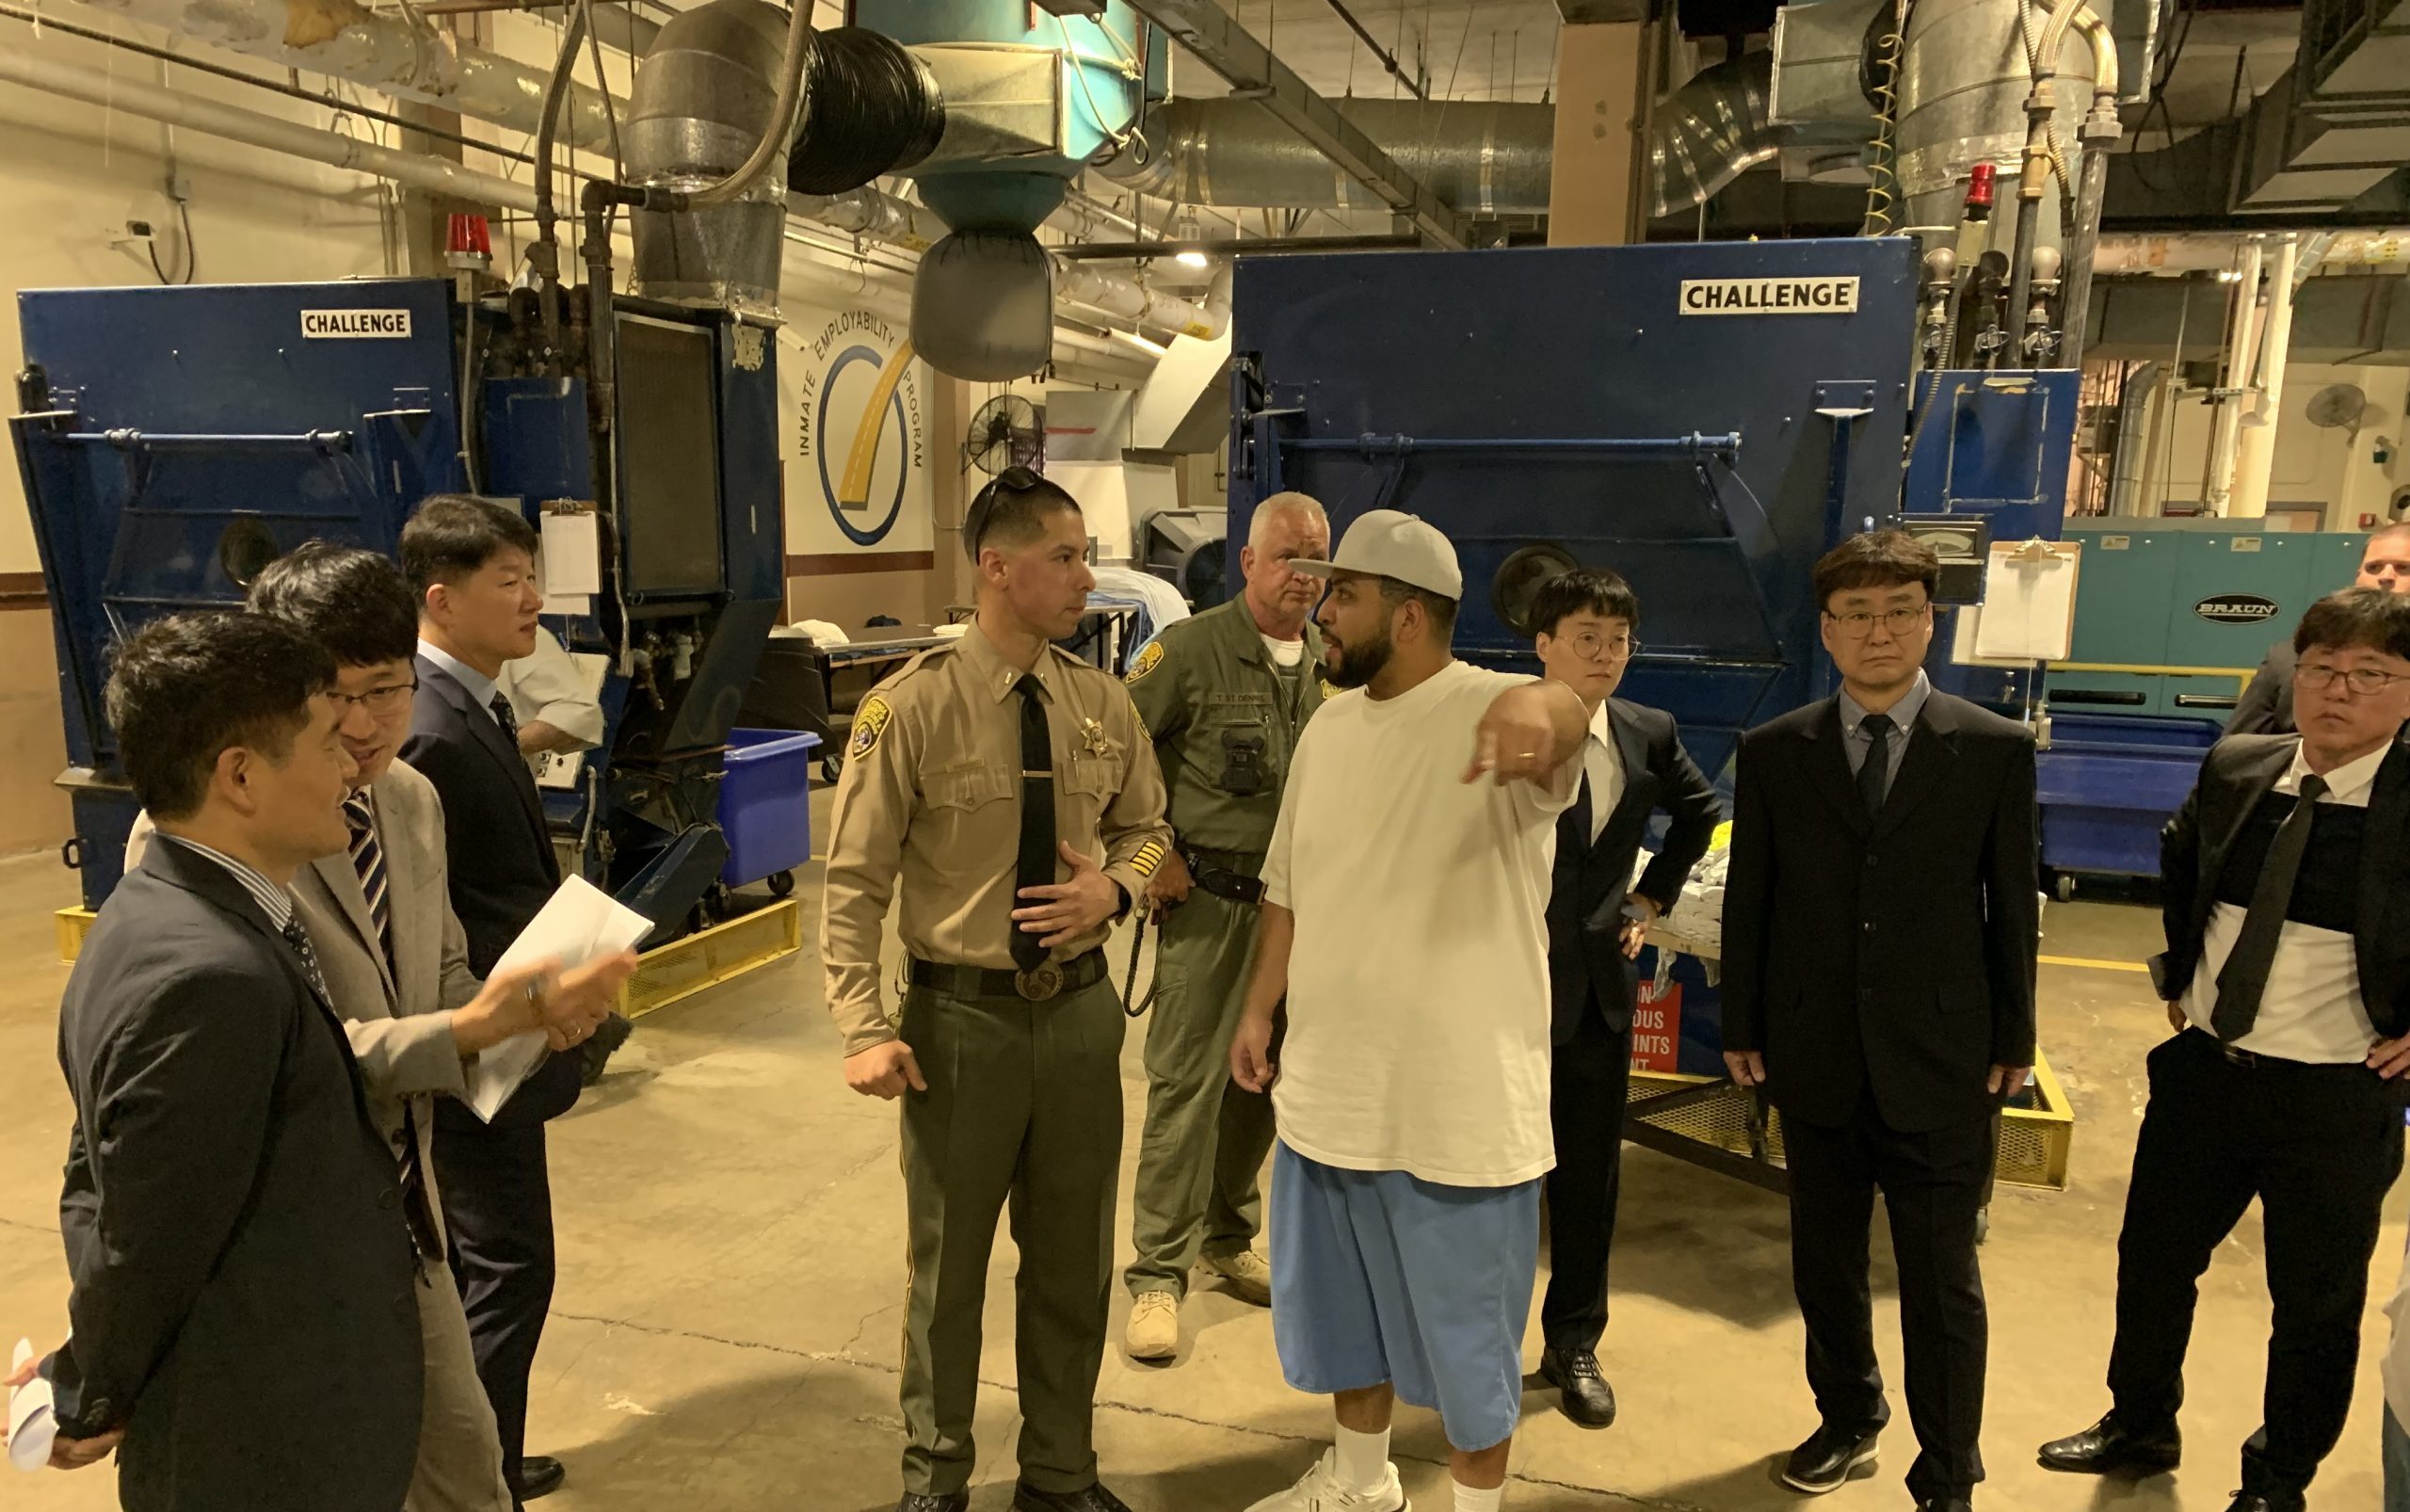 South Korea visits SAC group of men standing together in laundry facility